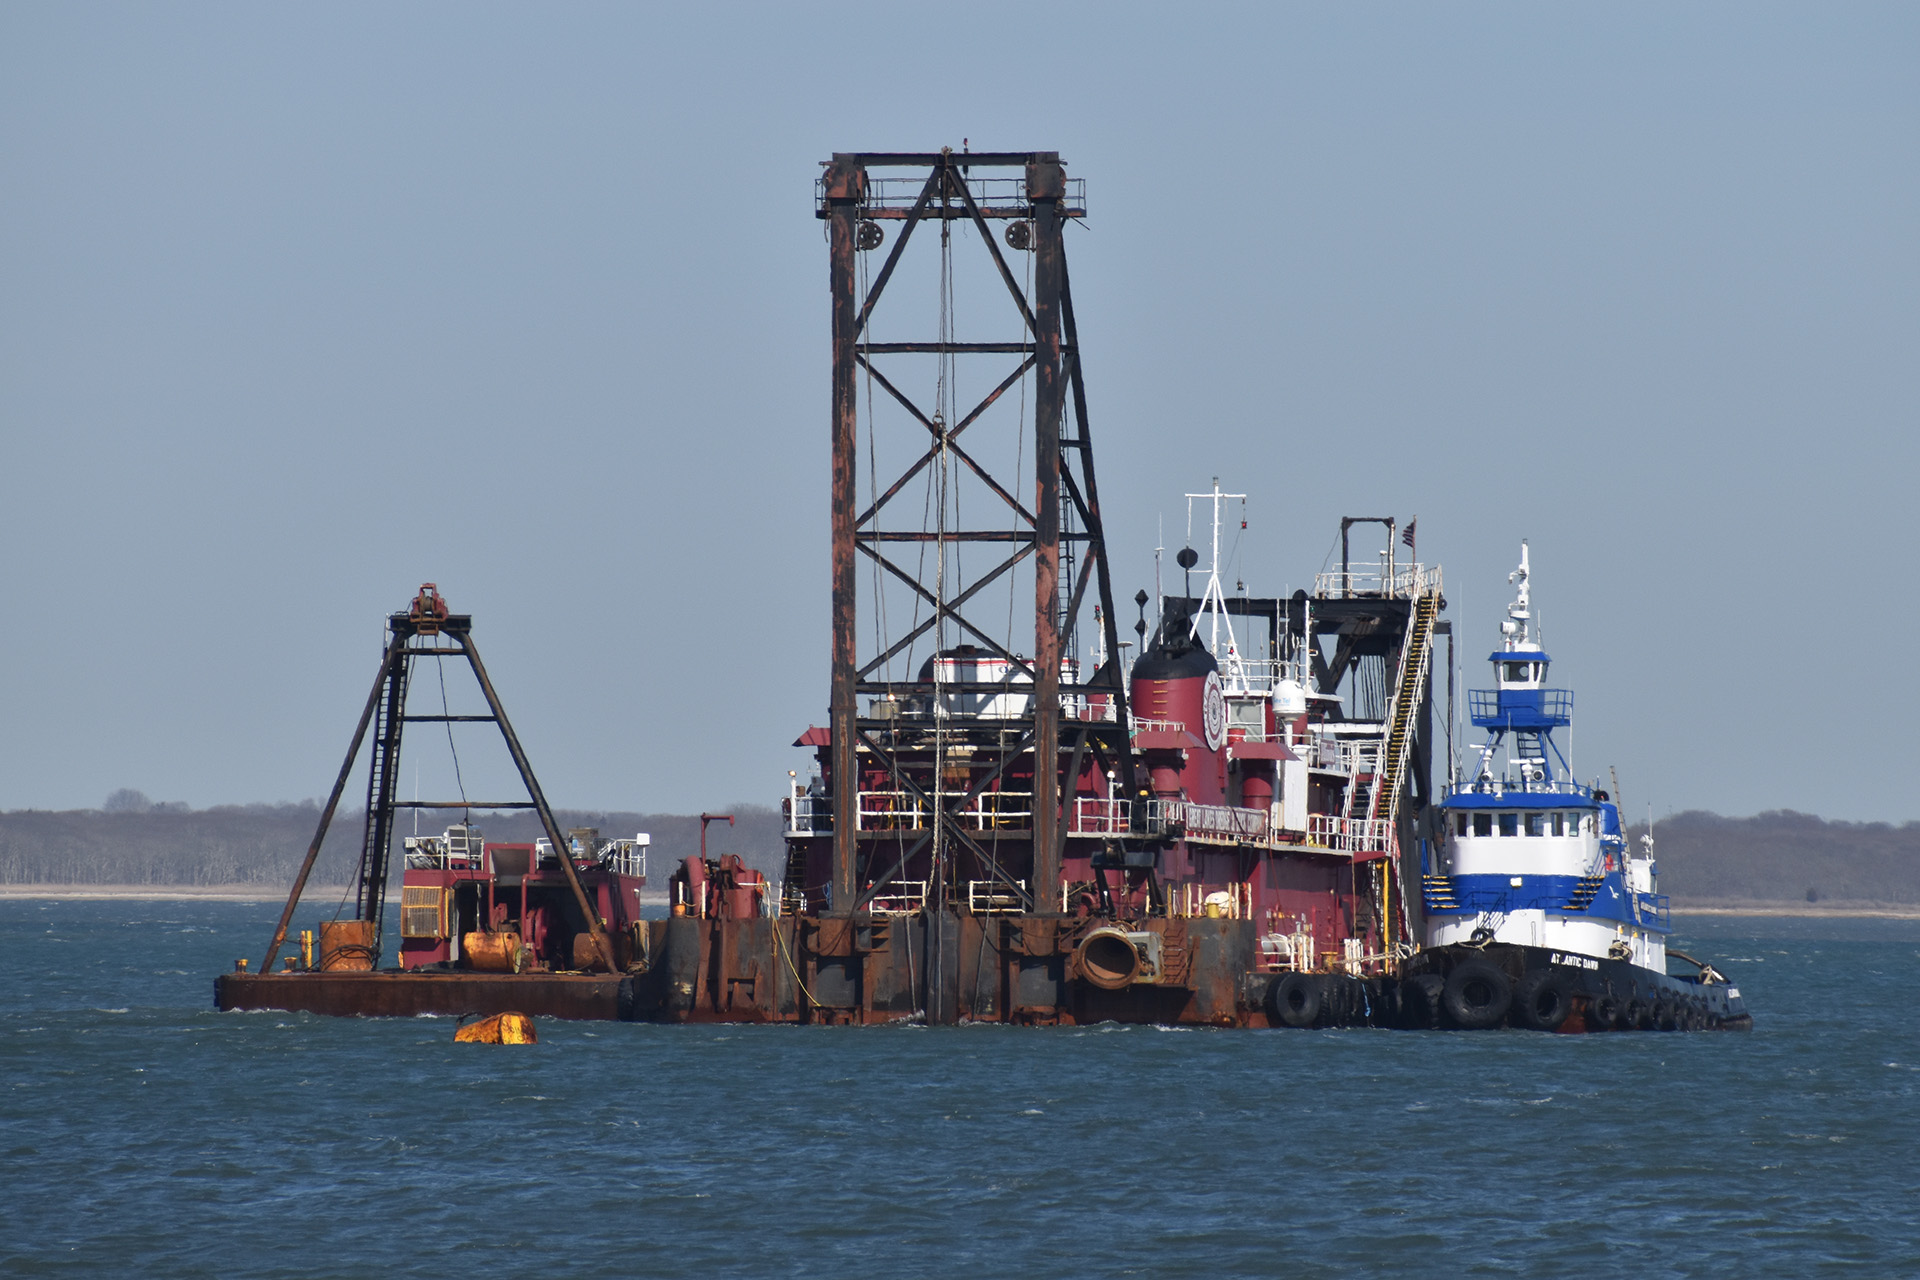 The Great Lakes Dredge & Dock Company dredger pumped nearly 600,000 cubic yards of sand onto the beach in Hampton Bays as part of FIMP